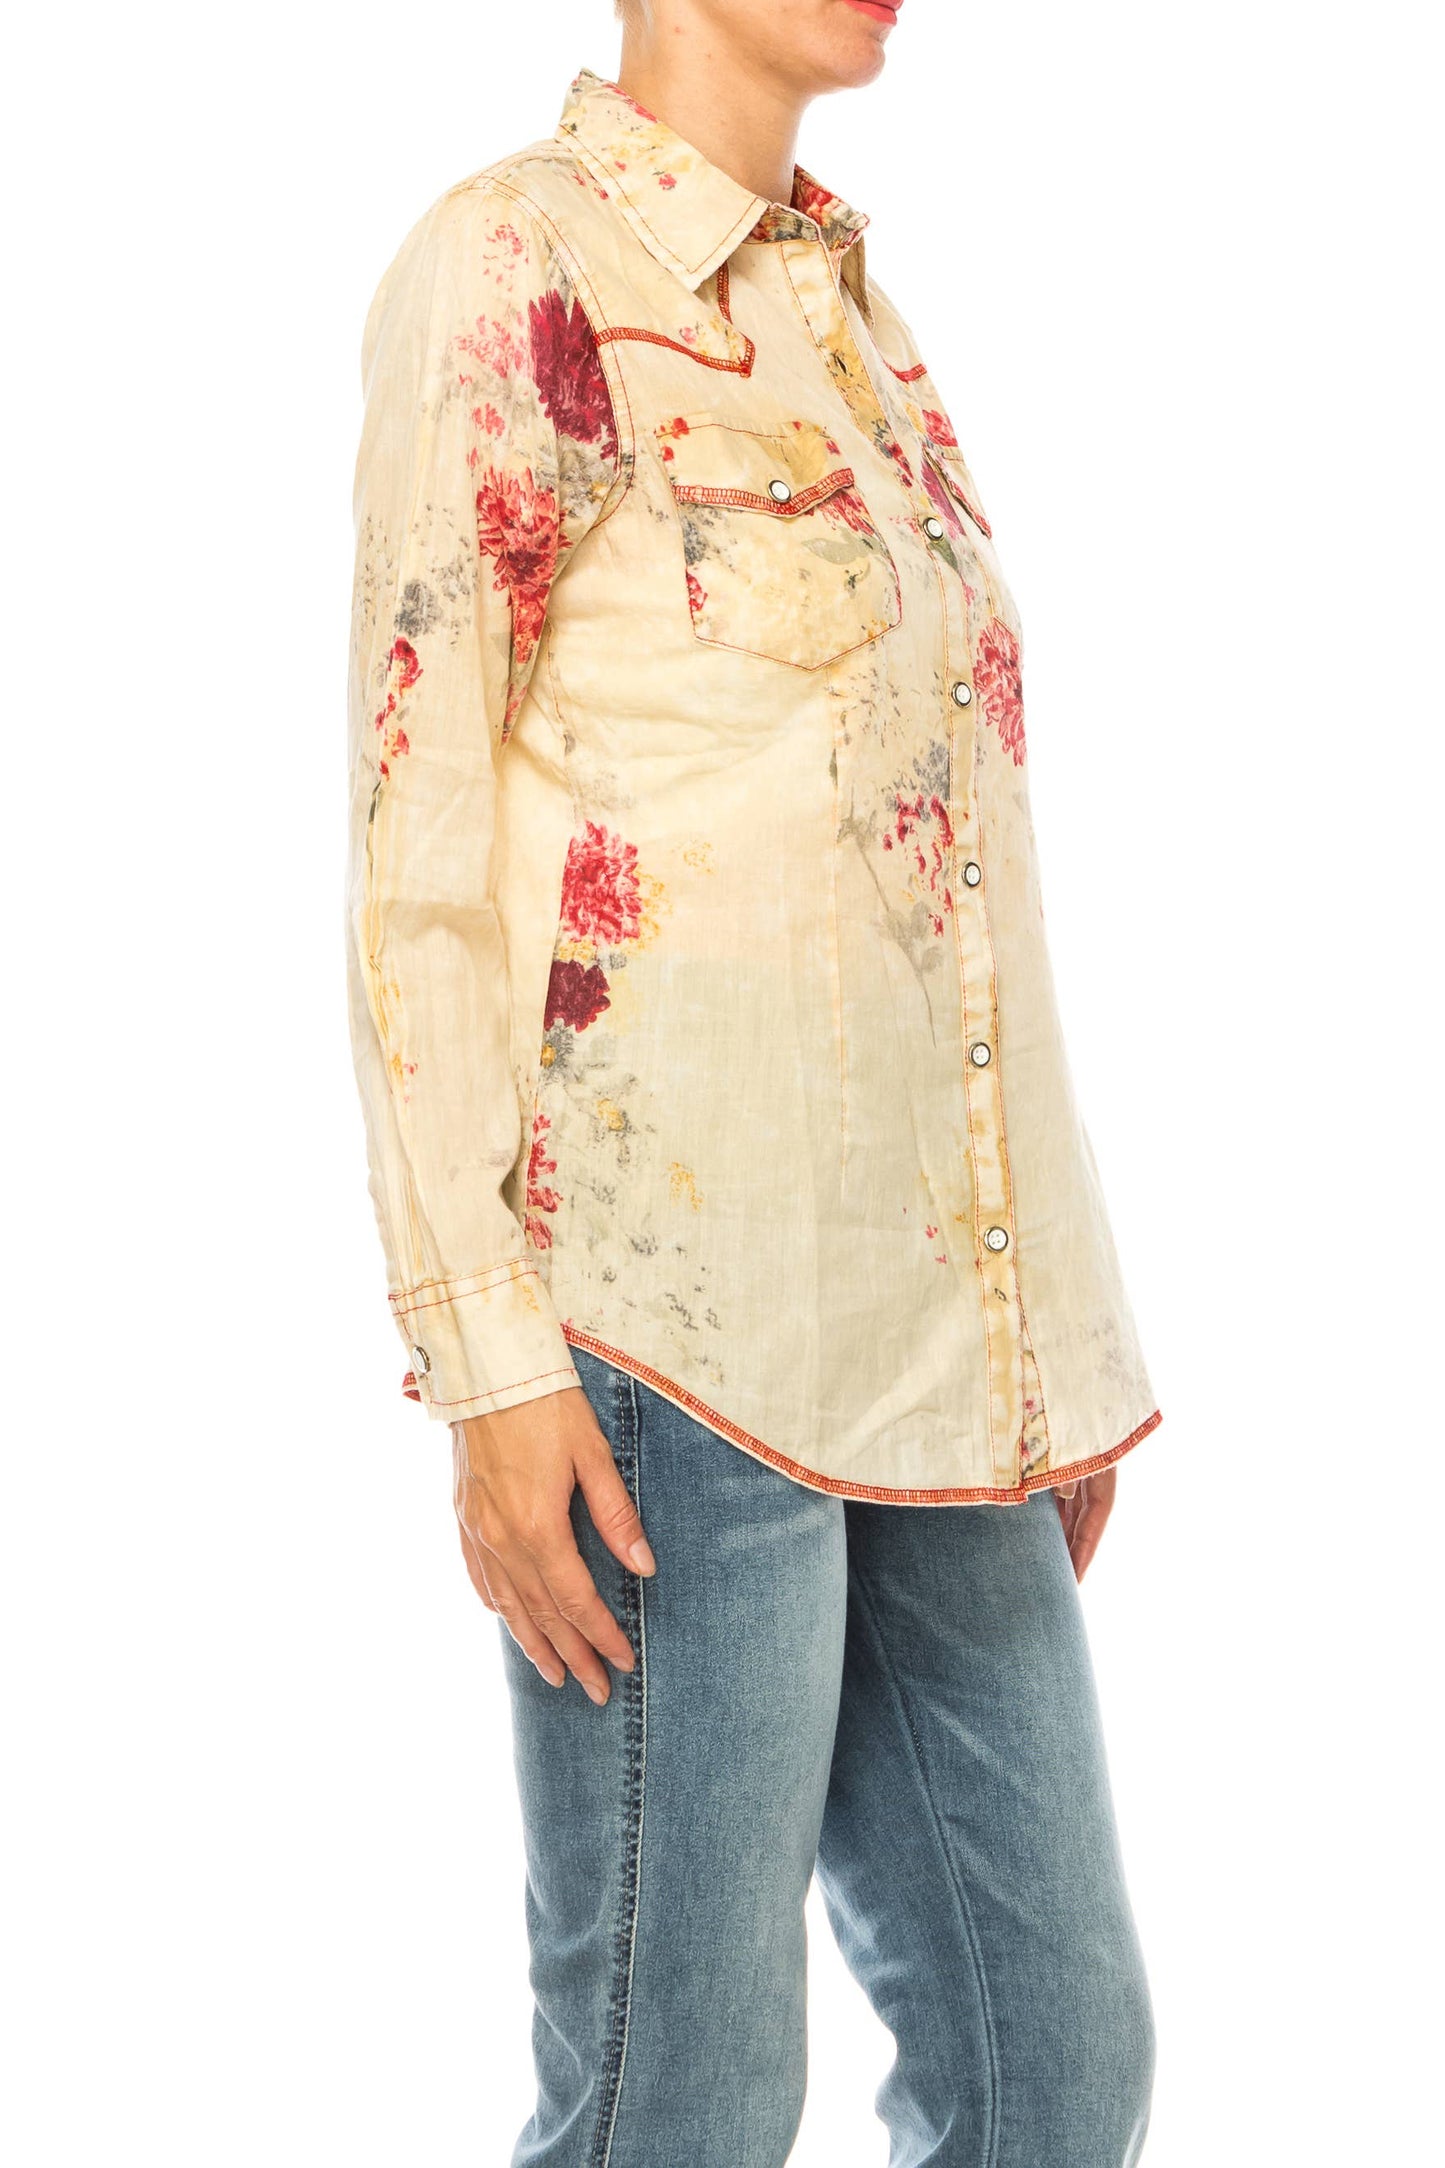 Magazine Clothing - Taupe Floral Button Down Western Shirt: Medium